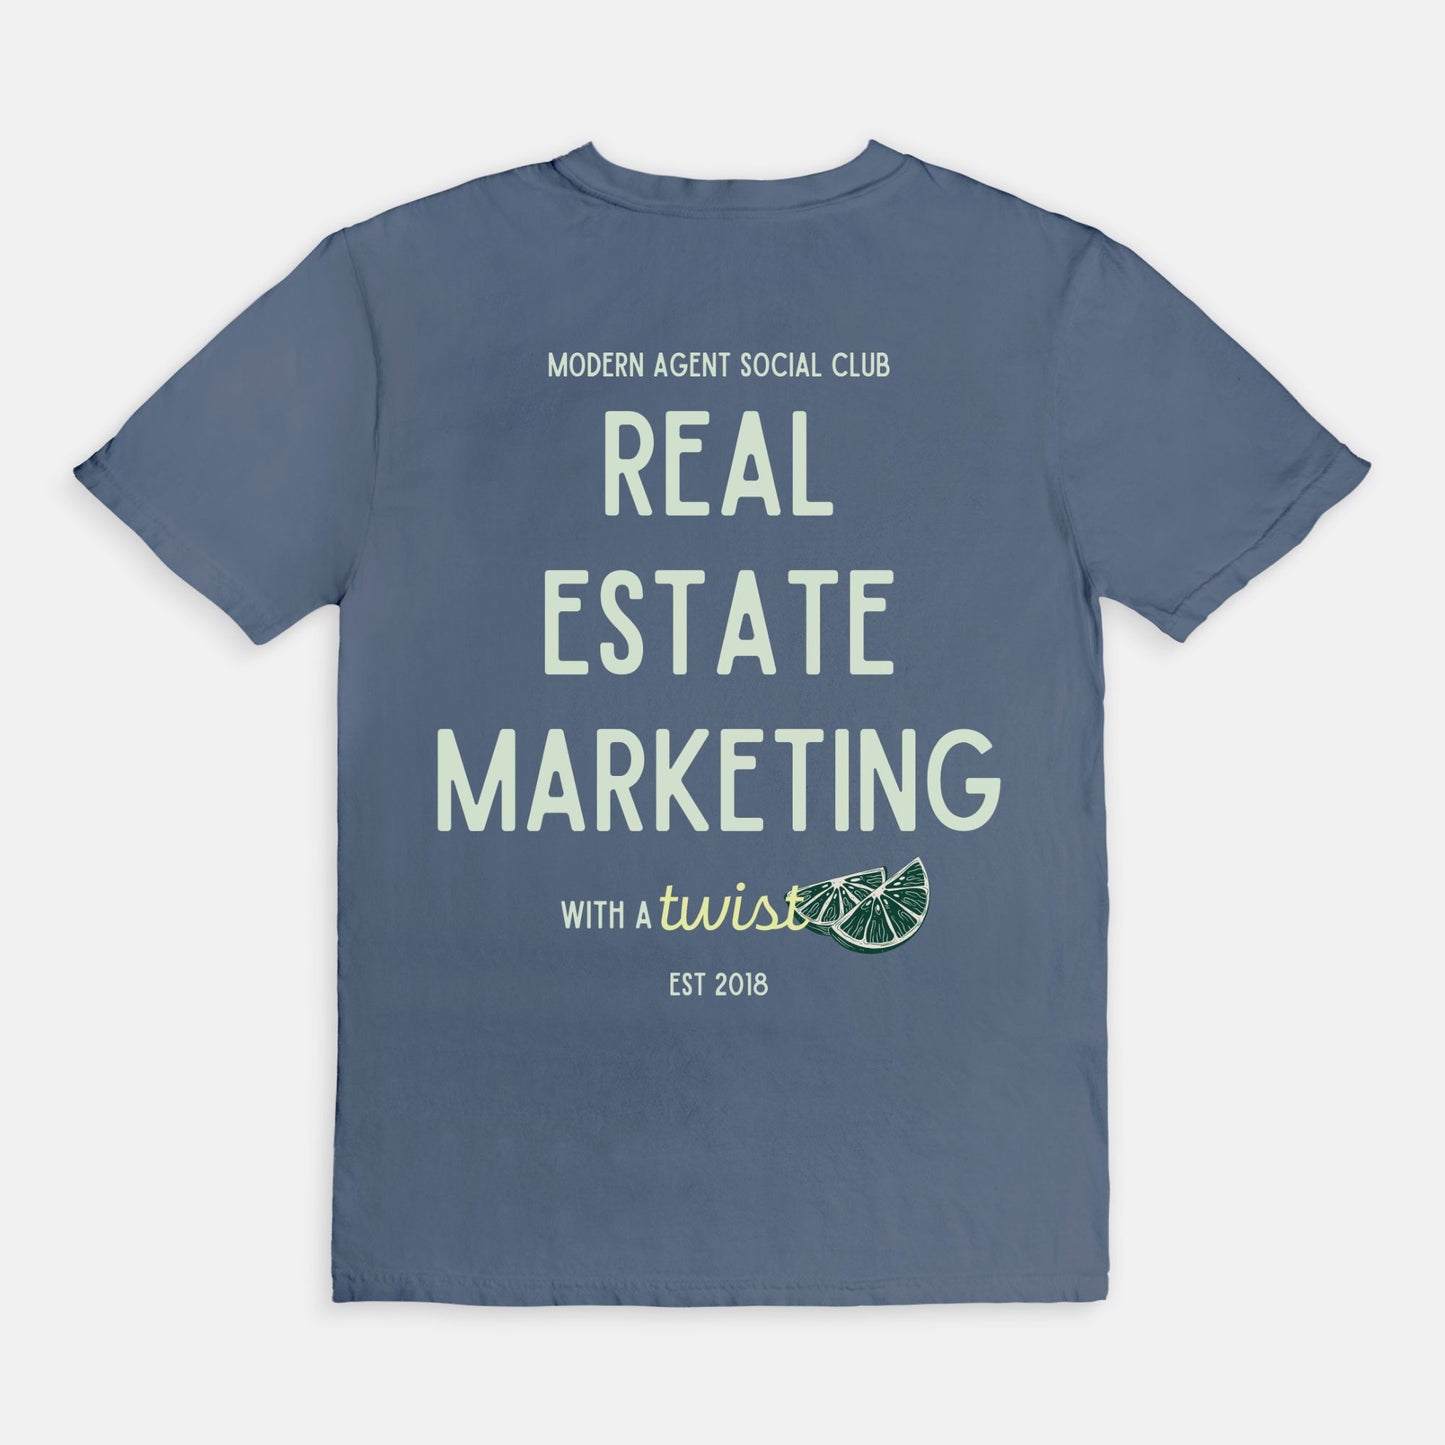 Marketing with a Twist Front and Back Tee